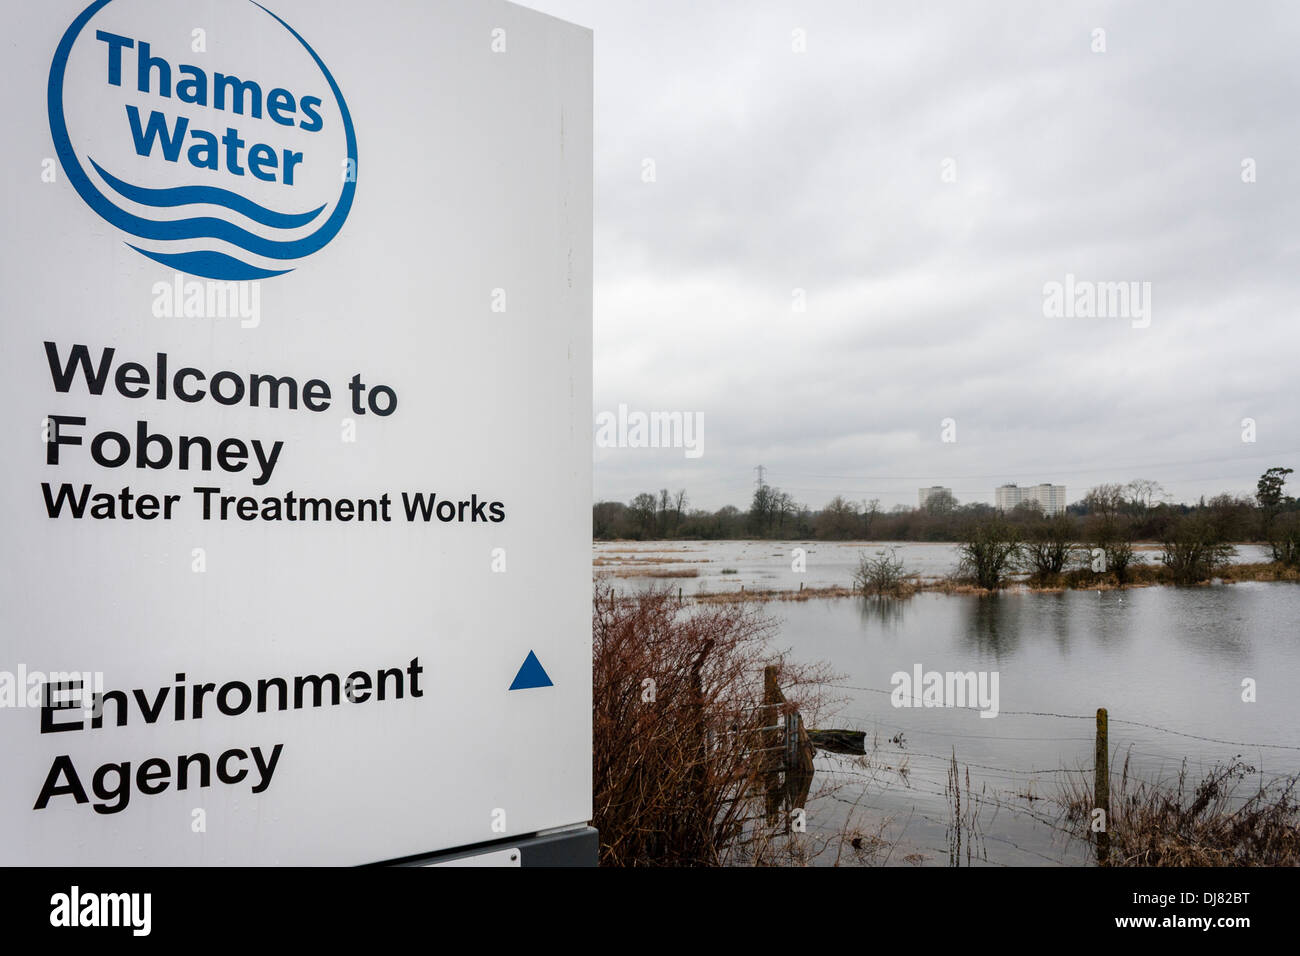 Thames Water Treatment Works / Environment Agency next to flooded field, Reading, Berkshire, England, UK. Stock Photo